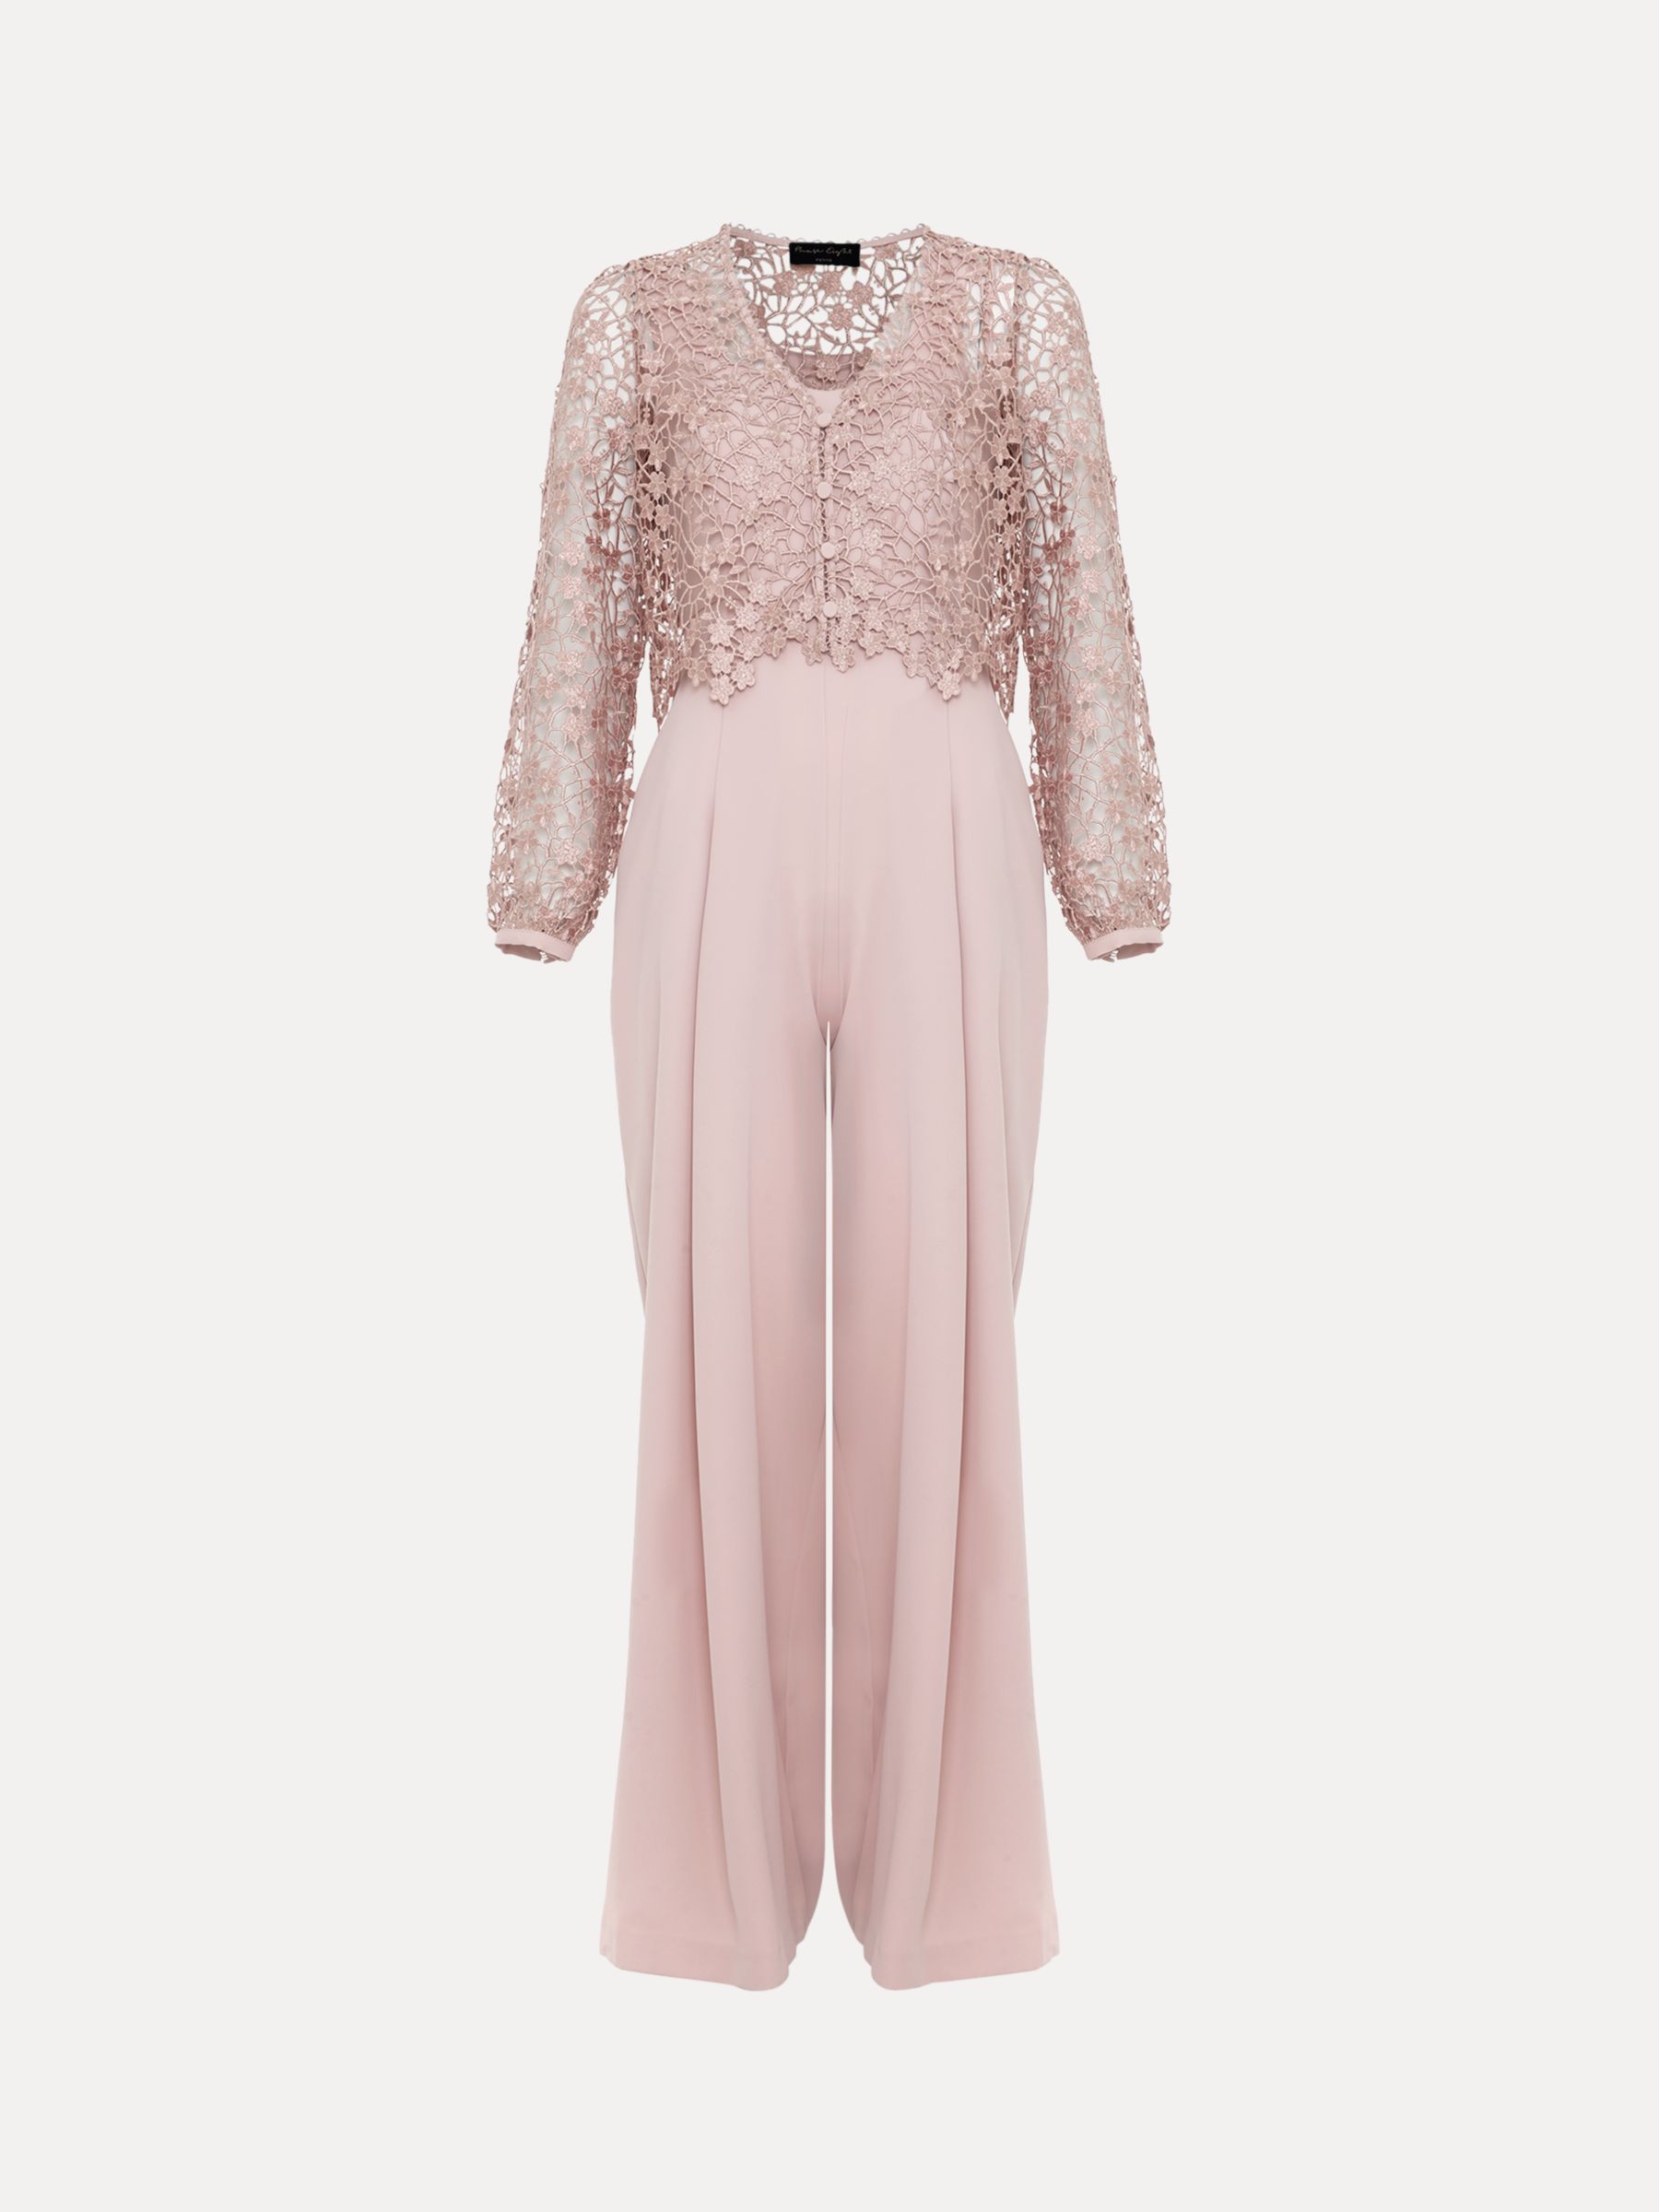 Phase Eight Petite Mariposa Lace Overlay Jumpsuit, Pale Pink at 